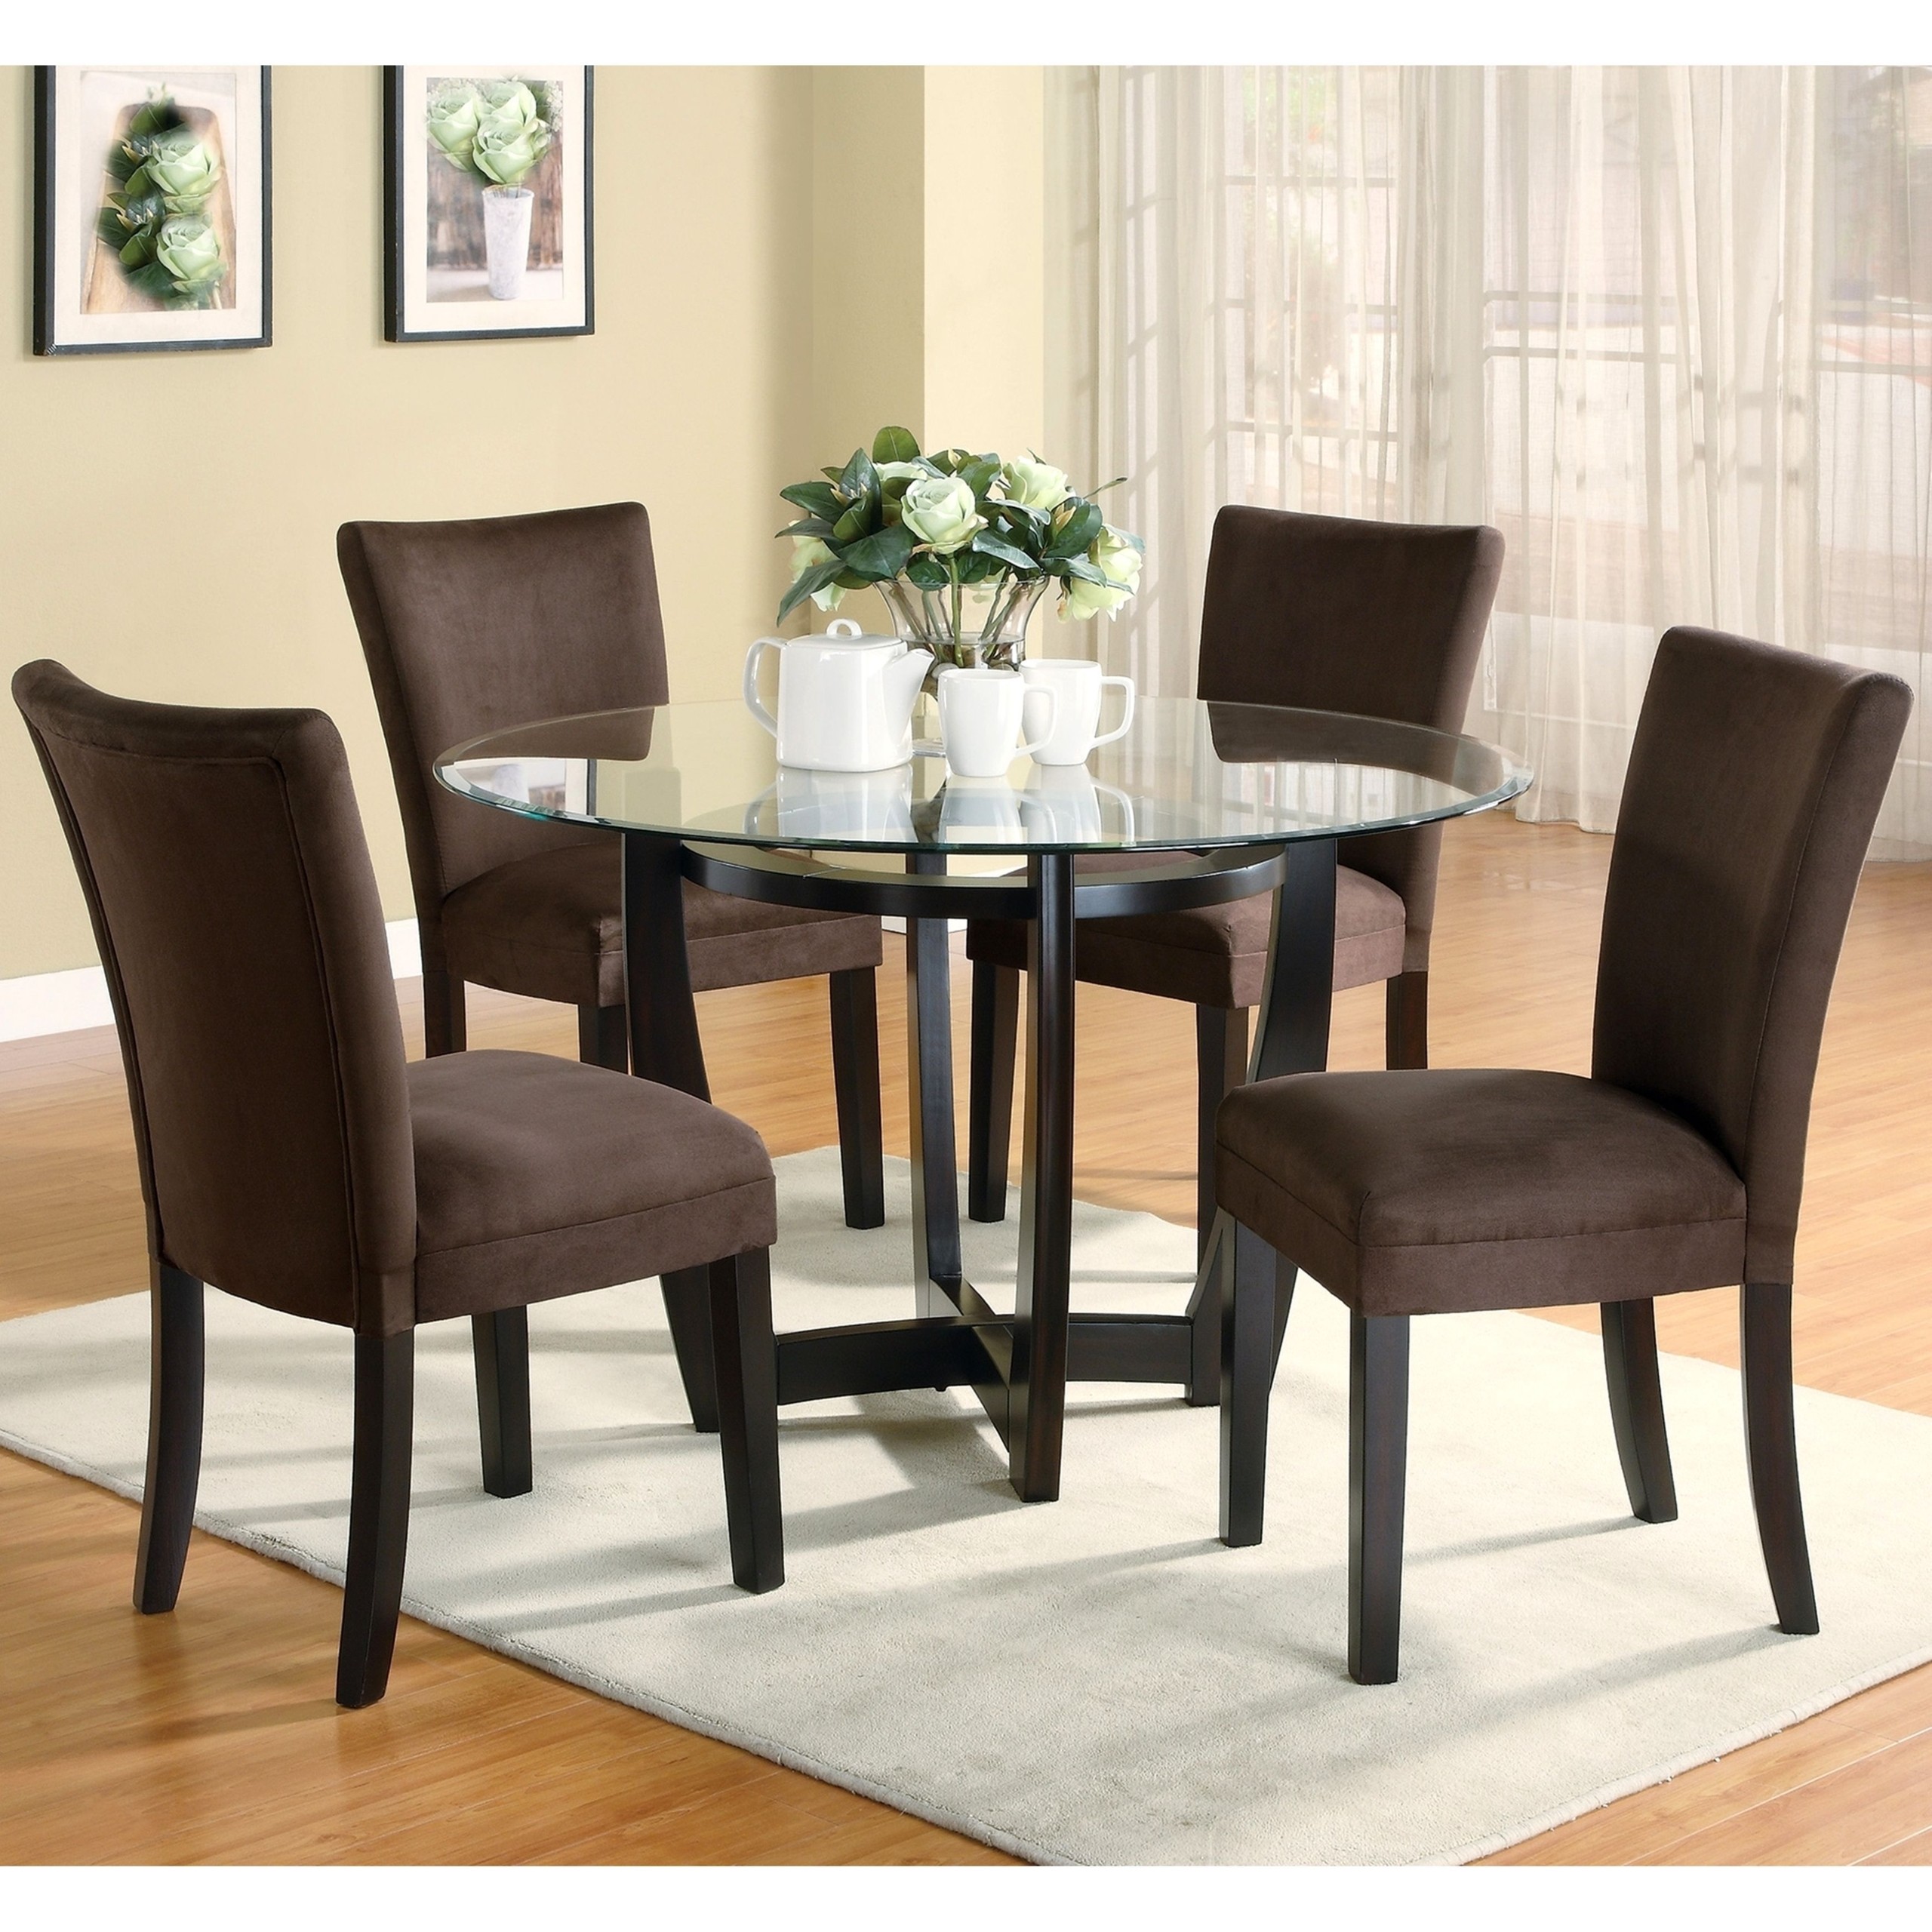 Round glass top dining sets 9